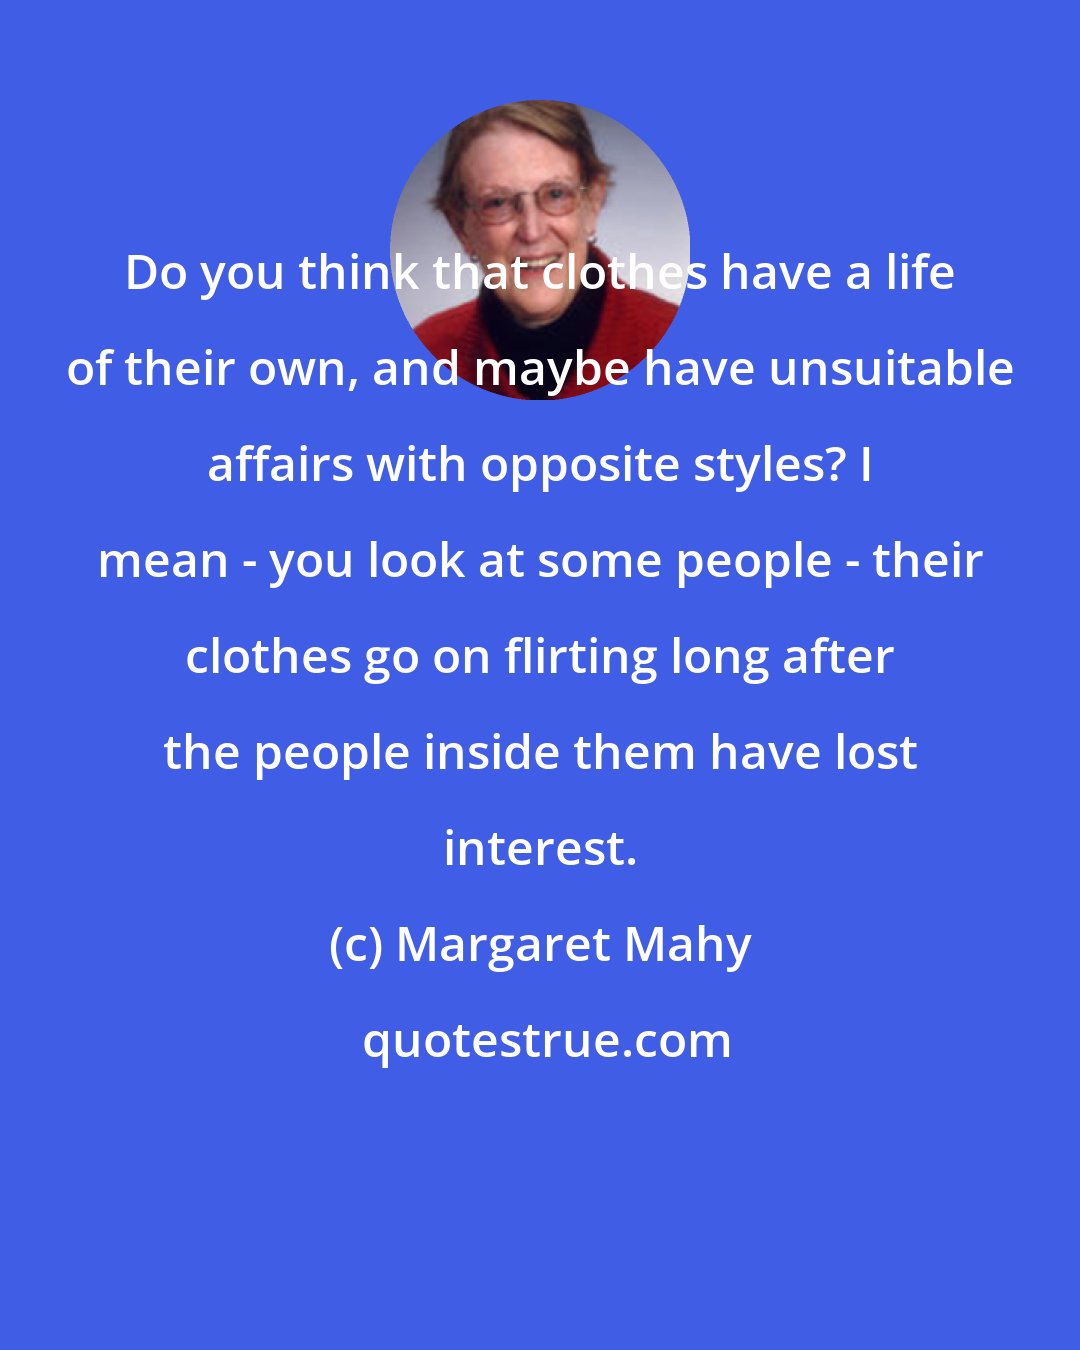 Margaret Mahy: Do you think that clothes have a life of their own, and maybe have unsuitable affairs with opposite styles? I mean - you look at some people - their clothes go on flirting long after the people inside them have lost interest.